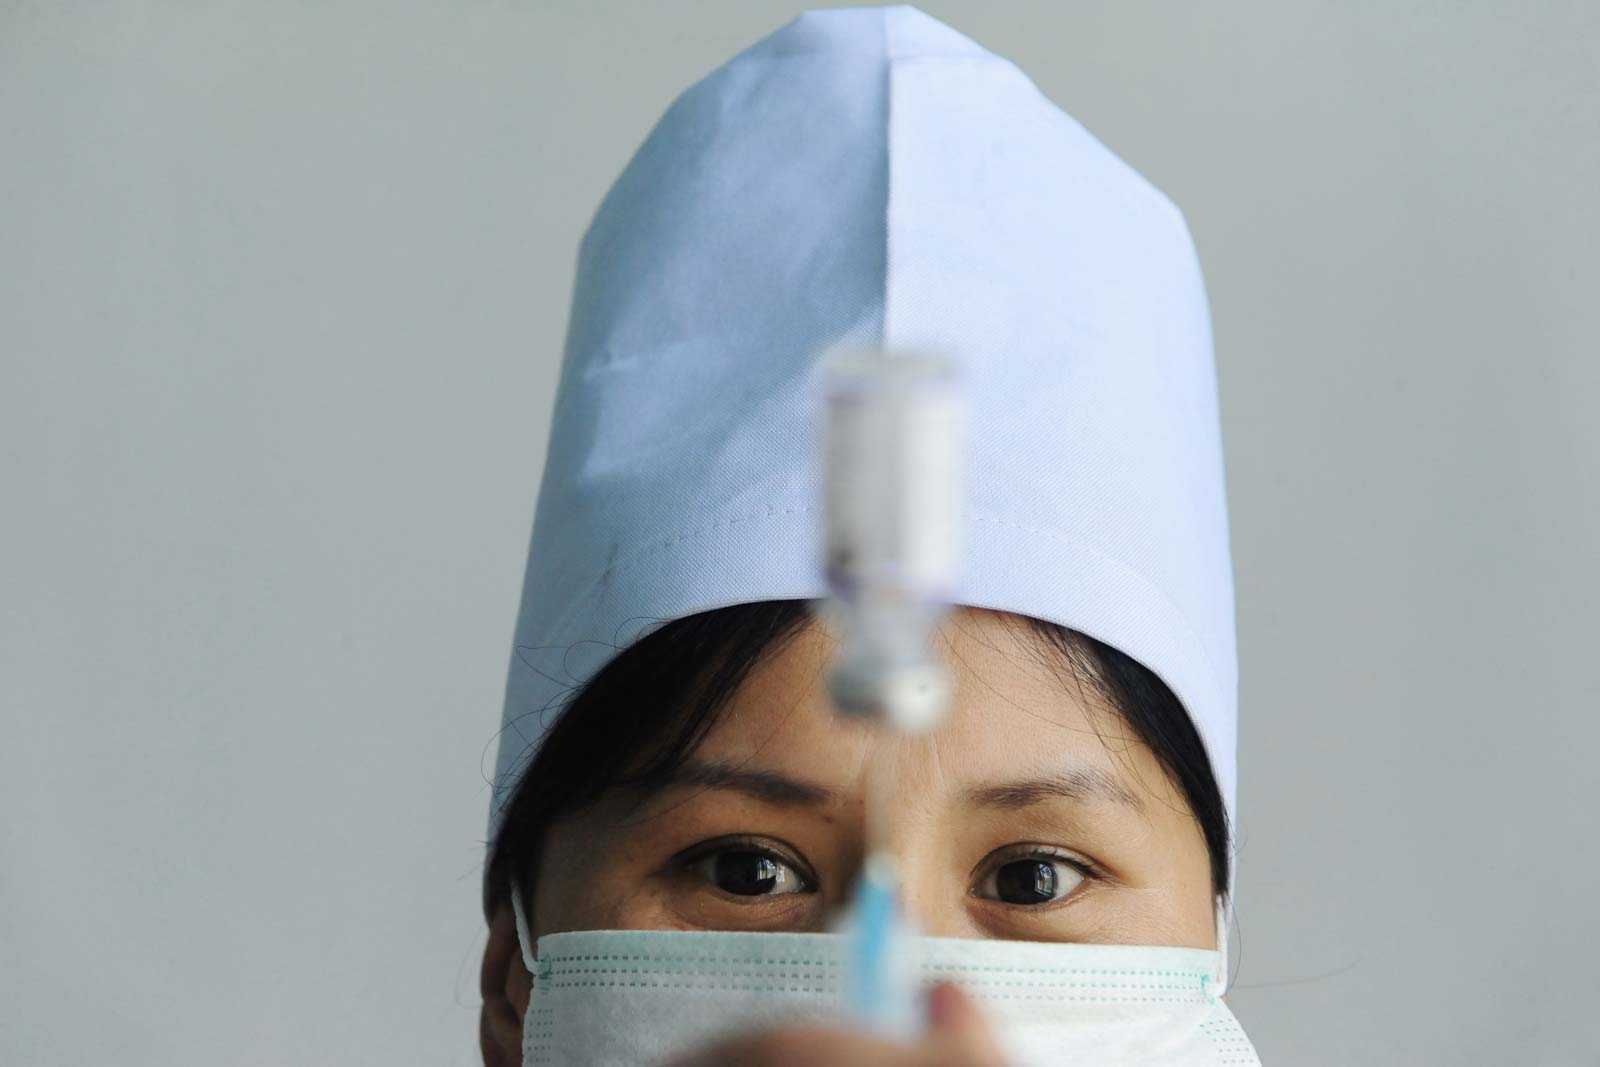  Geography is not the only obstacle to reaching children. Large numbers of Kyrgyzstan’s doctors and nurses are being lured abroad by higher wages and the opportunity to work in more up-to-date medical facilities.